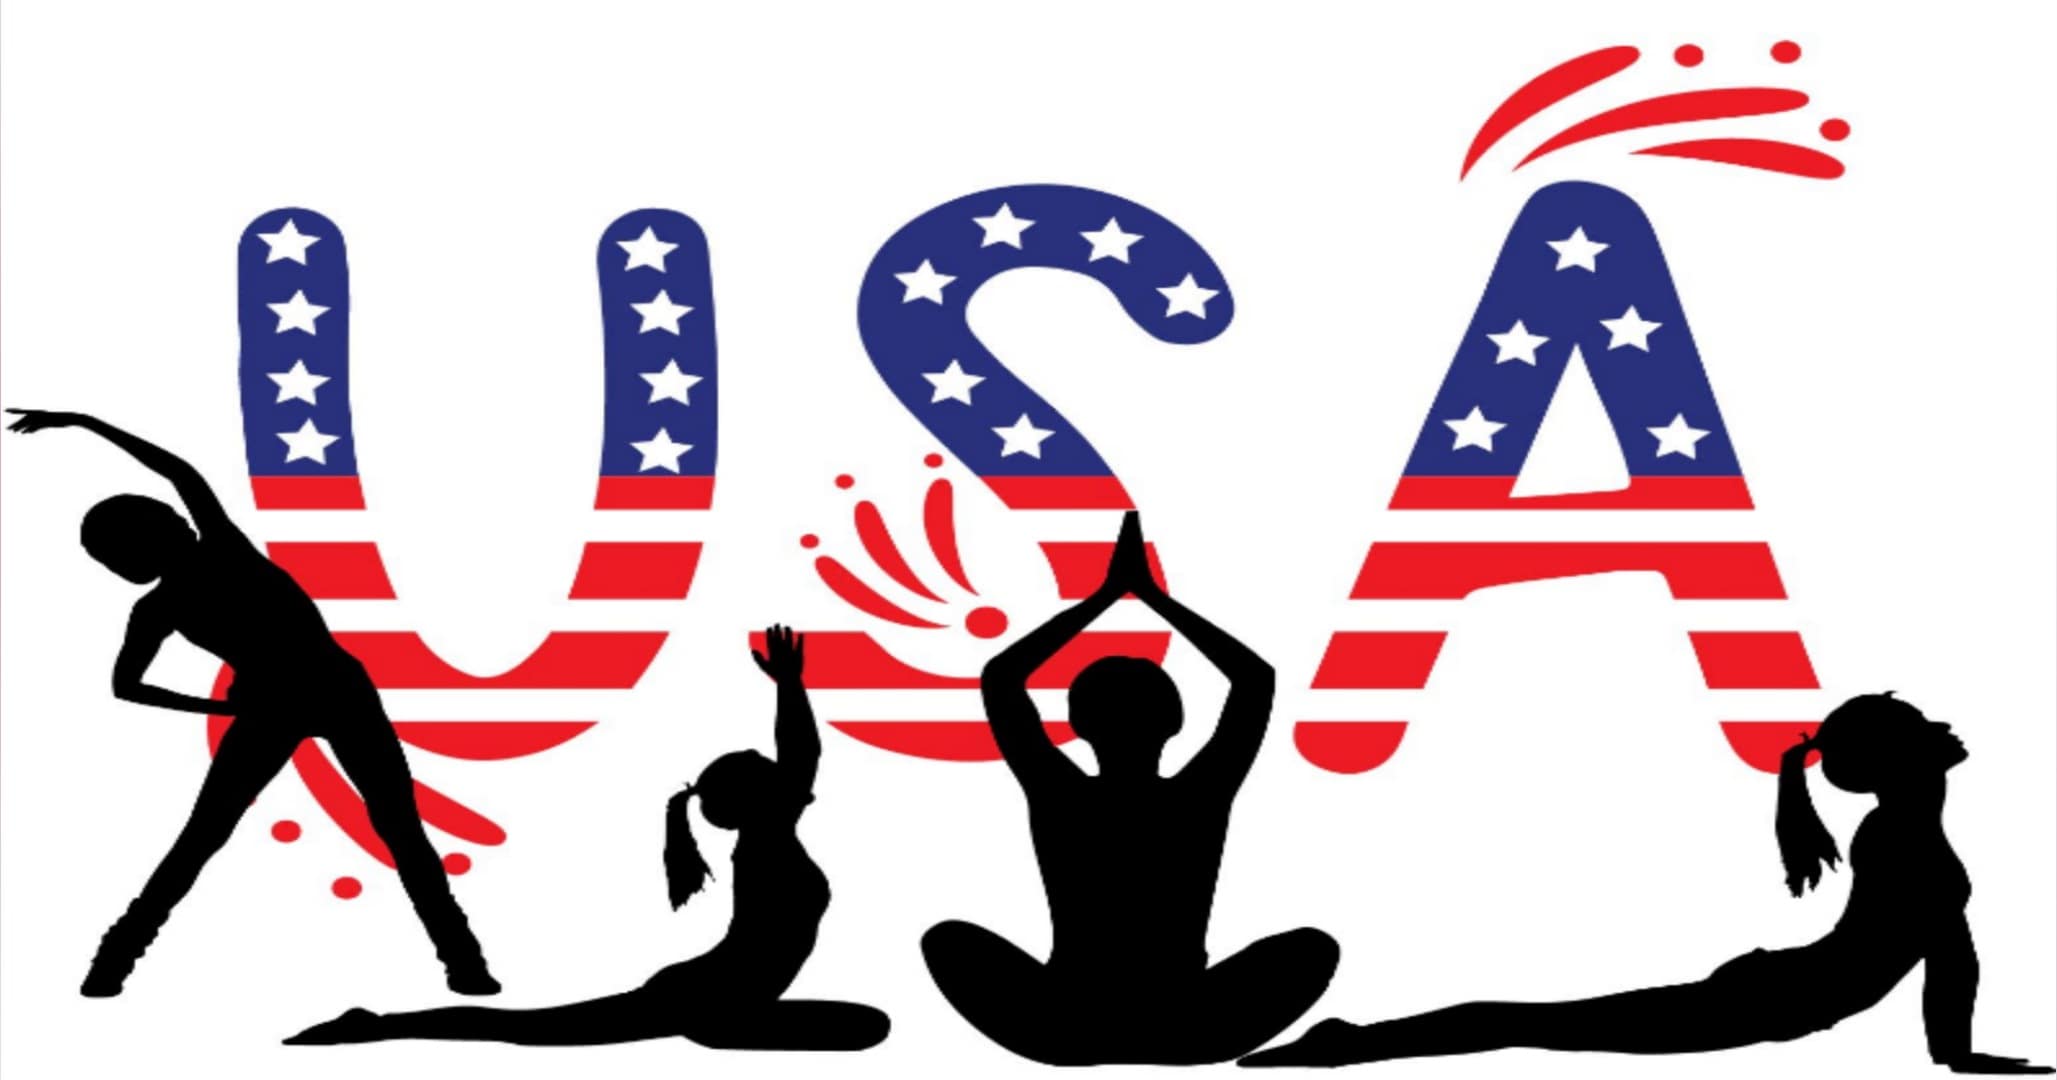 Is Yoga Popular in USA